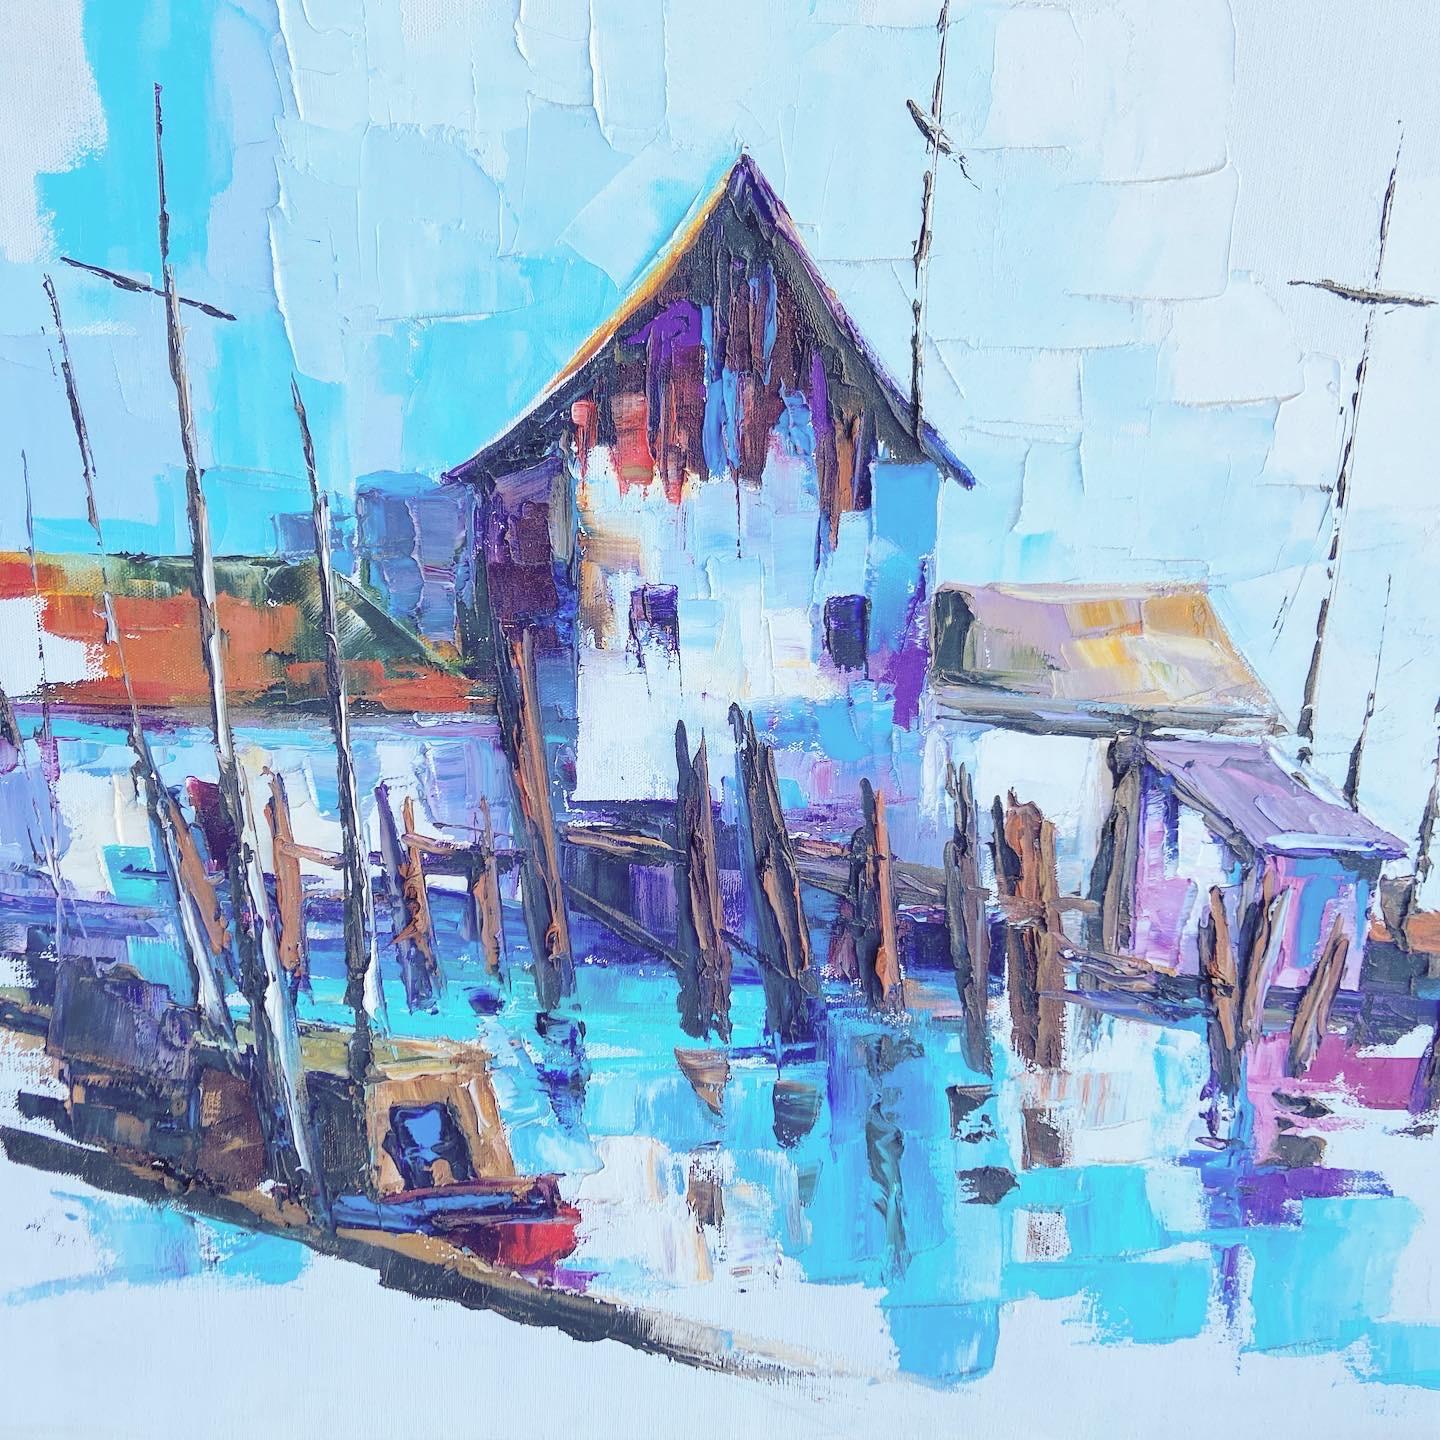 Colorful Oil Painting depicting an old boat house signed by Tina Pay.

Additional information:
Material: Canvas
Color: Blue, White
Style: Vintage
Artist: Tina Pay
Time Period: 1990s
Place of origin: USA
Dimension: 30.5” L, 1.5” D, 24” H.